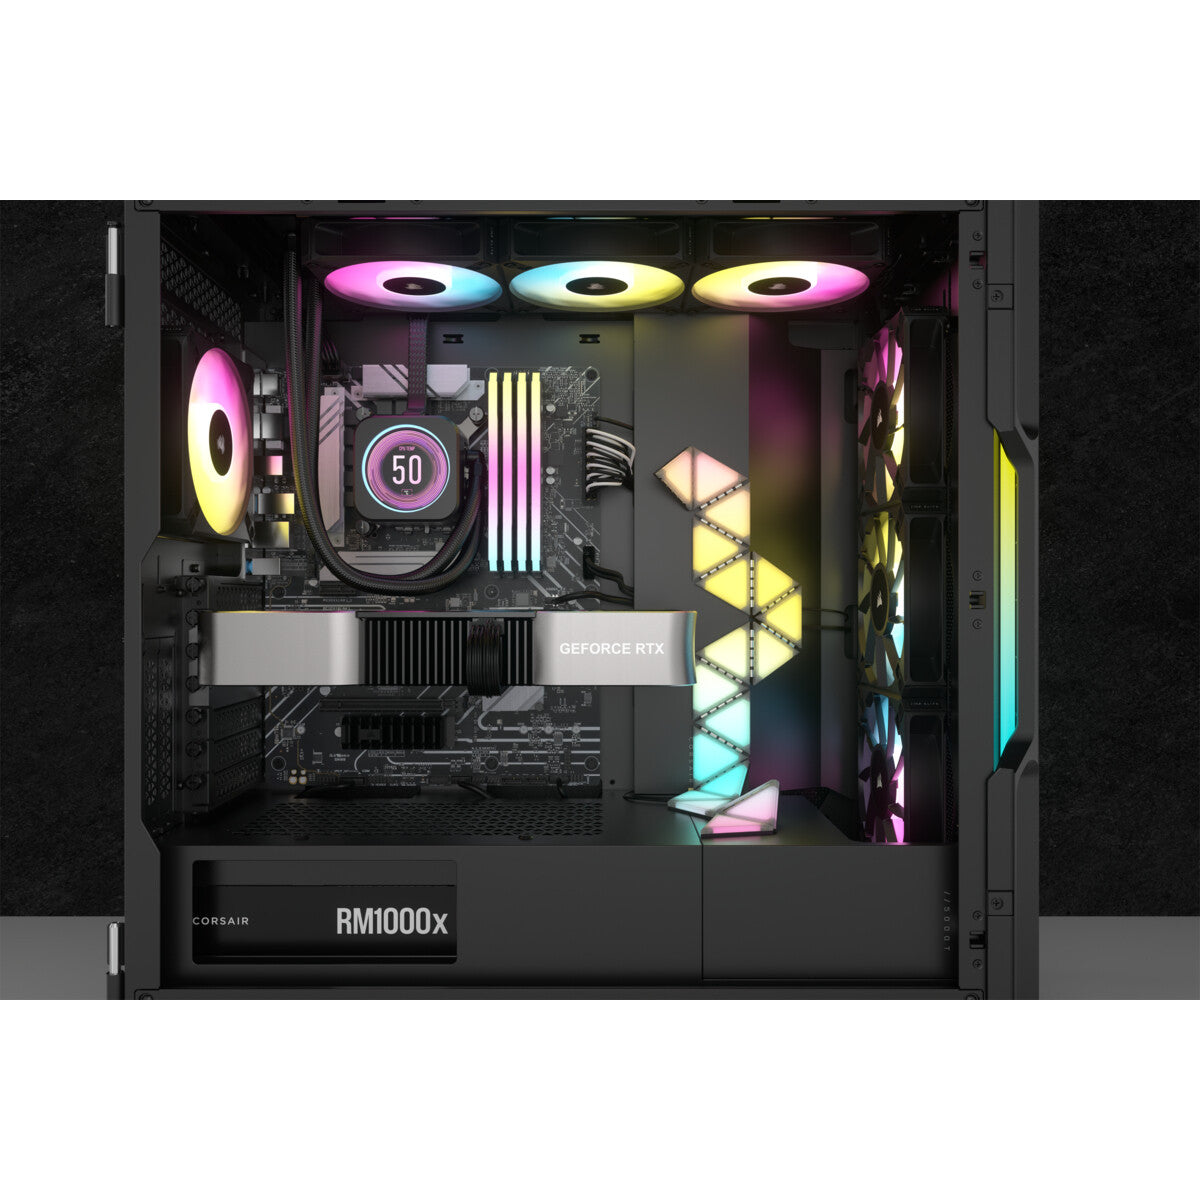 Corsair iCUE H150i ELITE LCD XT Display - All-in-one Liquid Processor Cooler in Black - 360mm